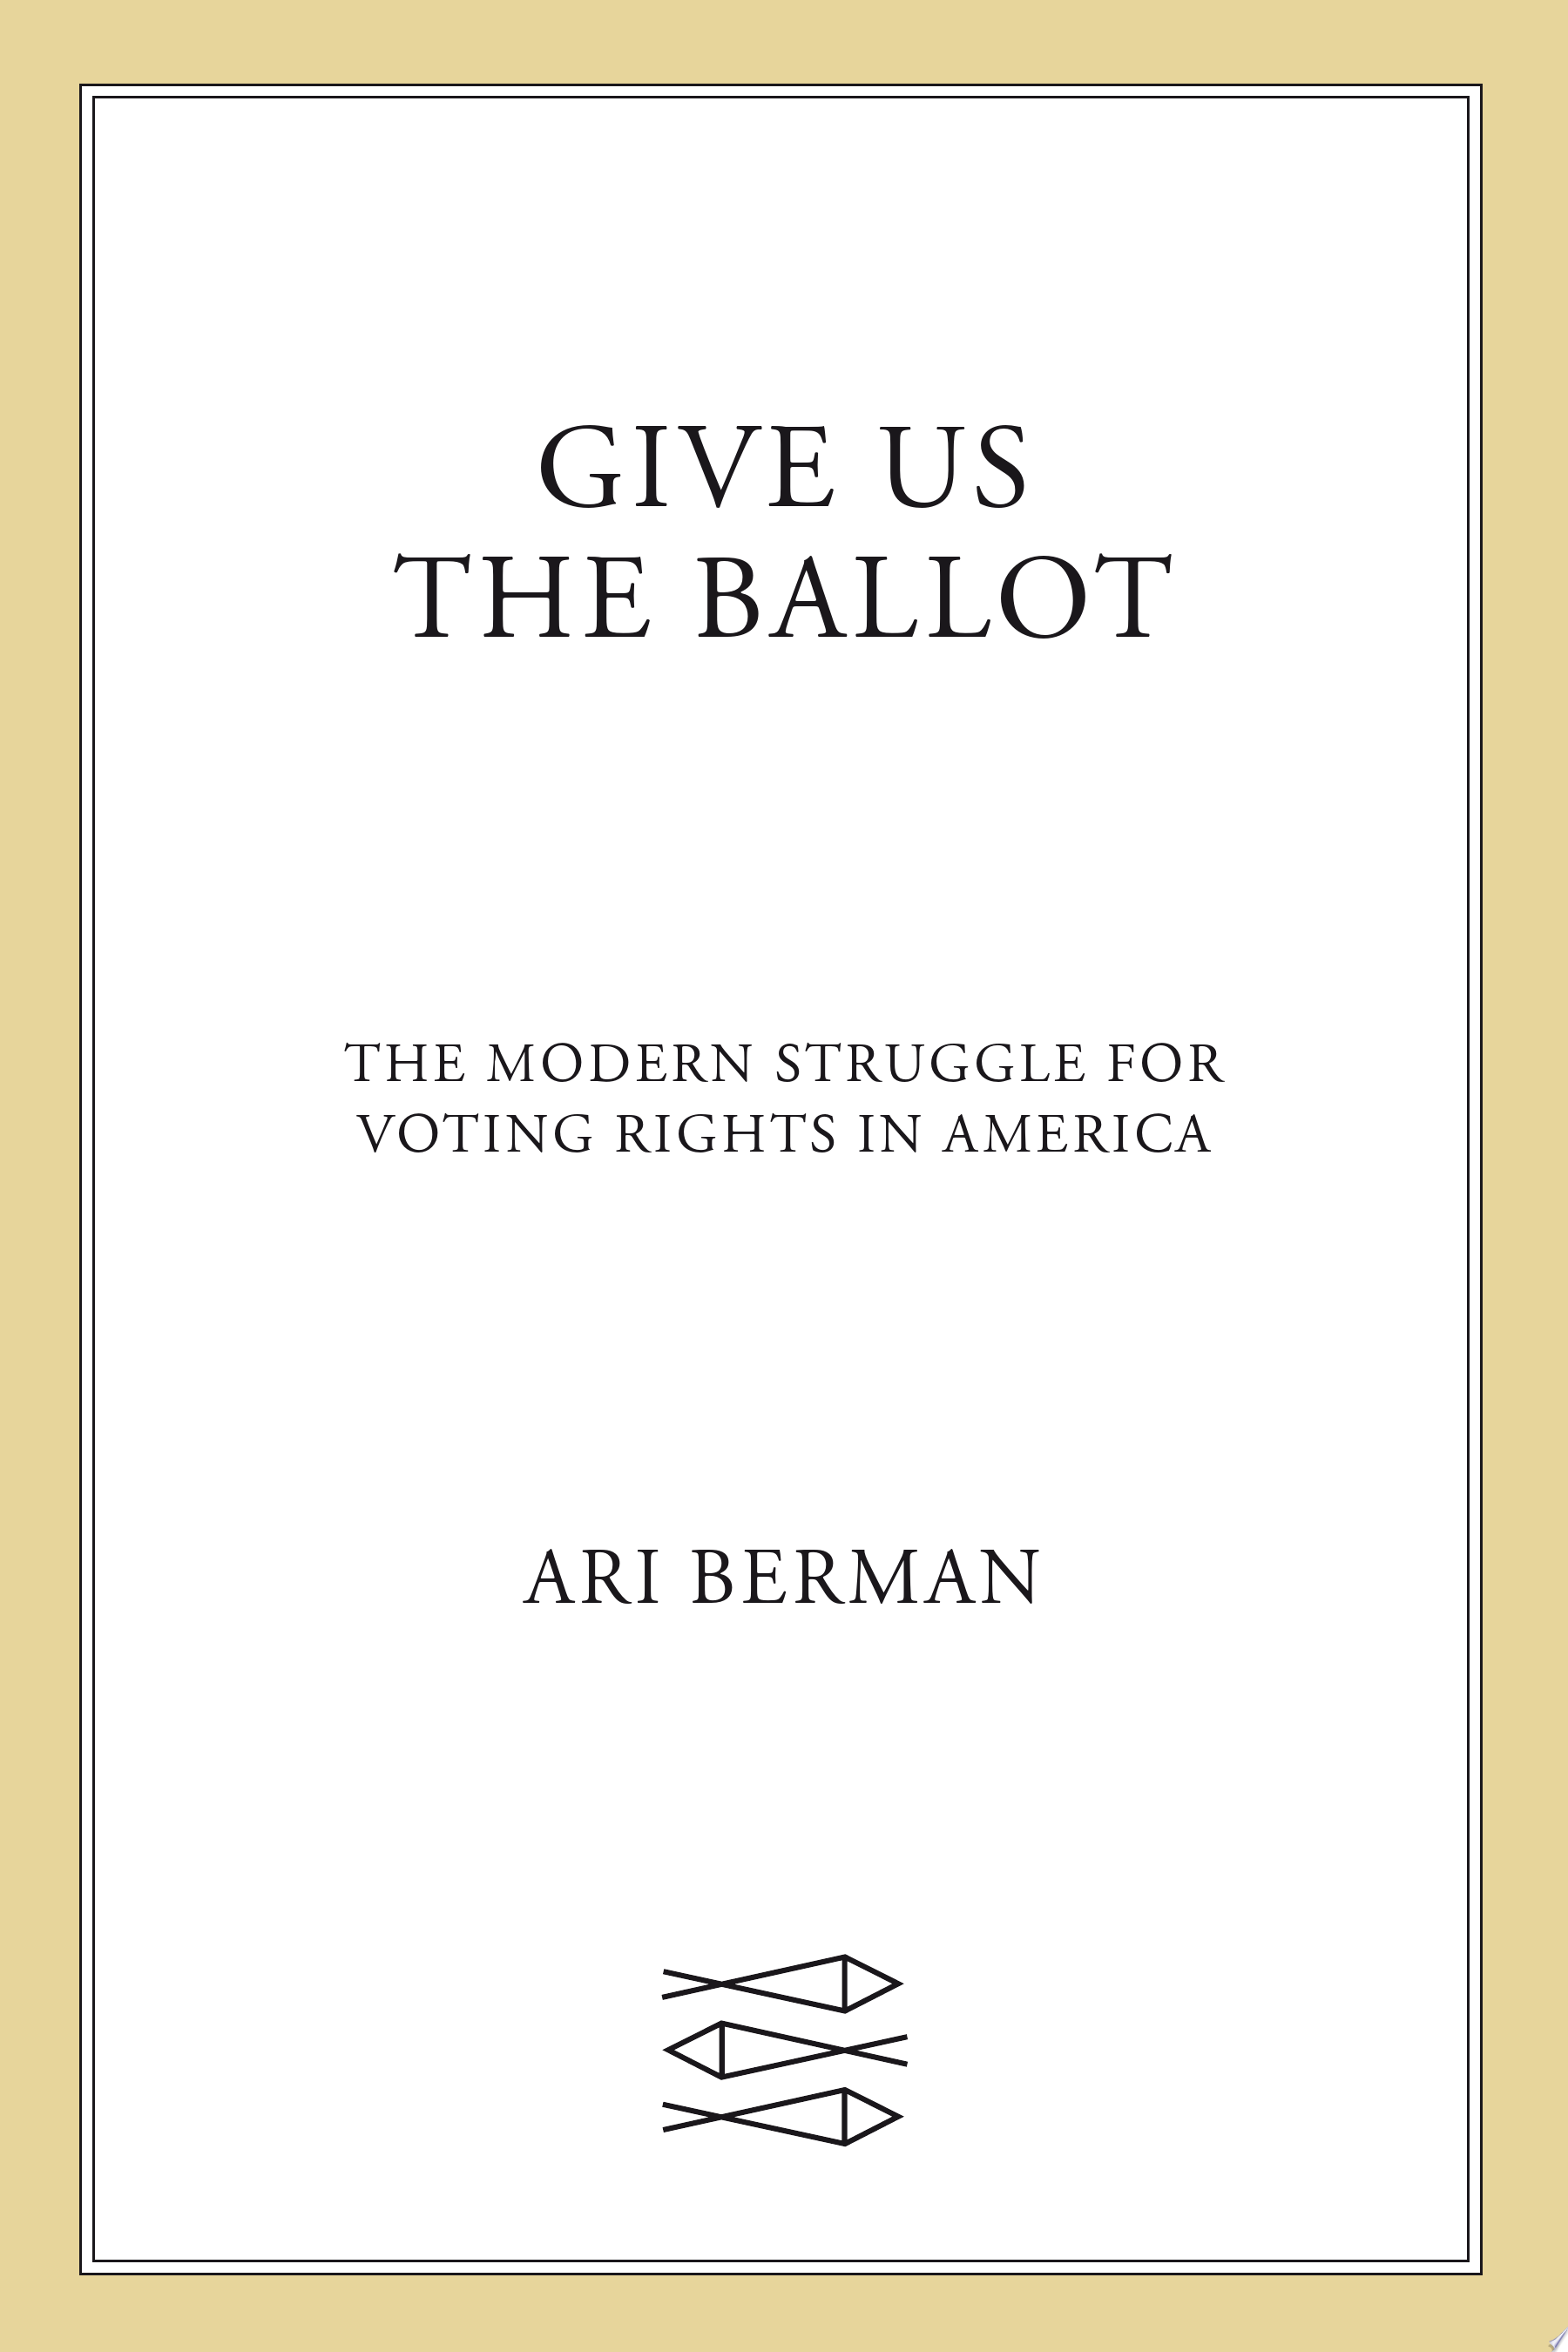 Image for "Give Us the Ballot"